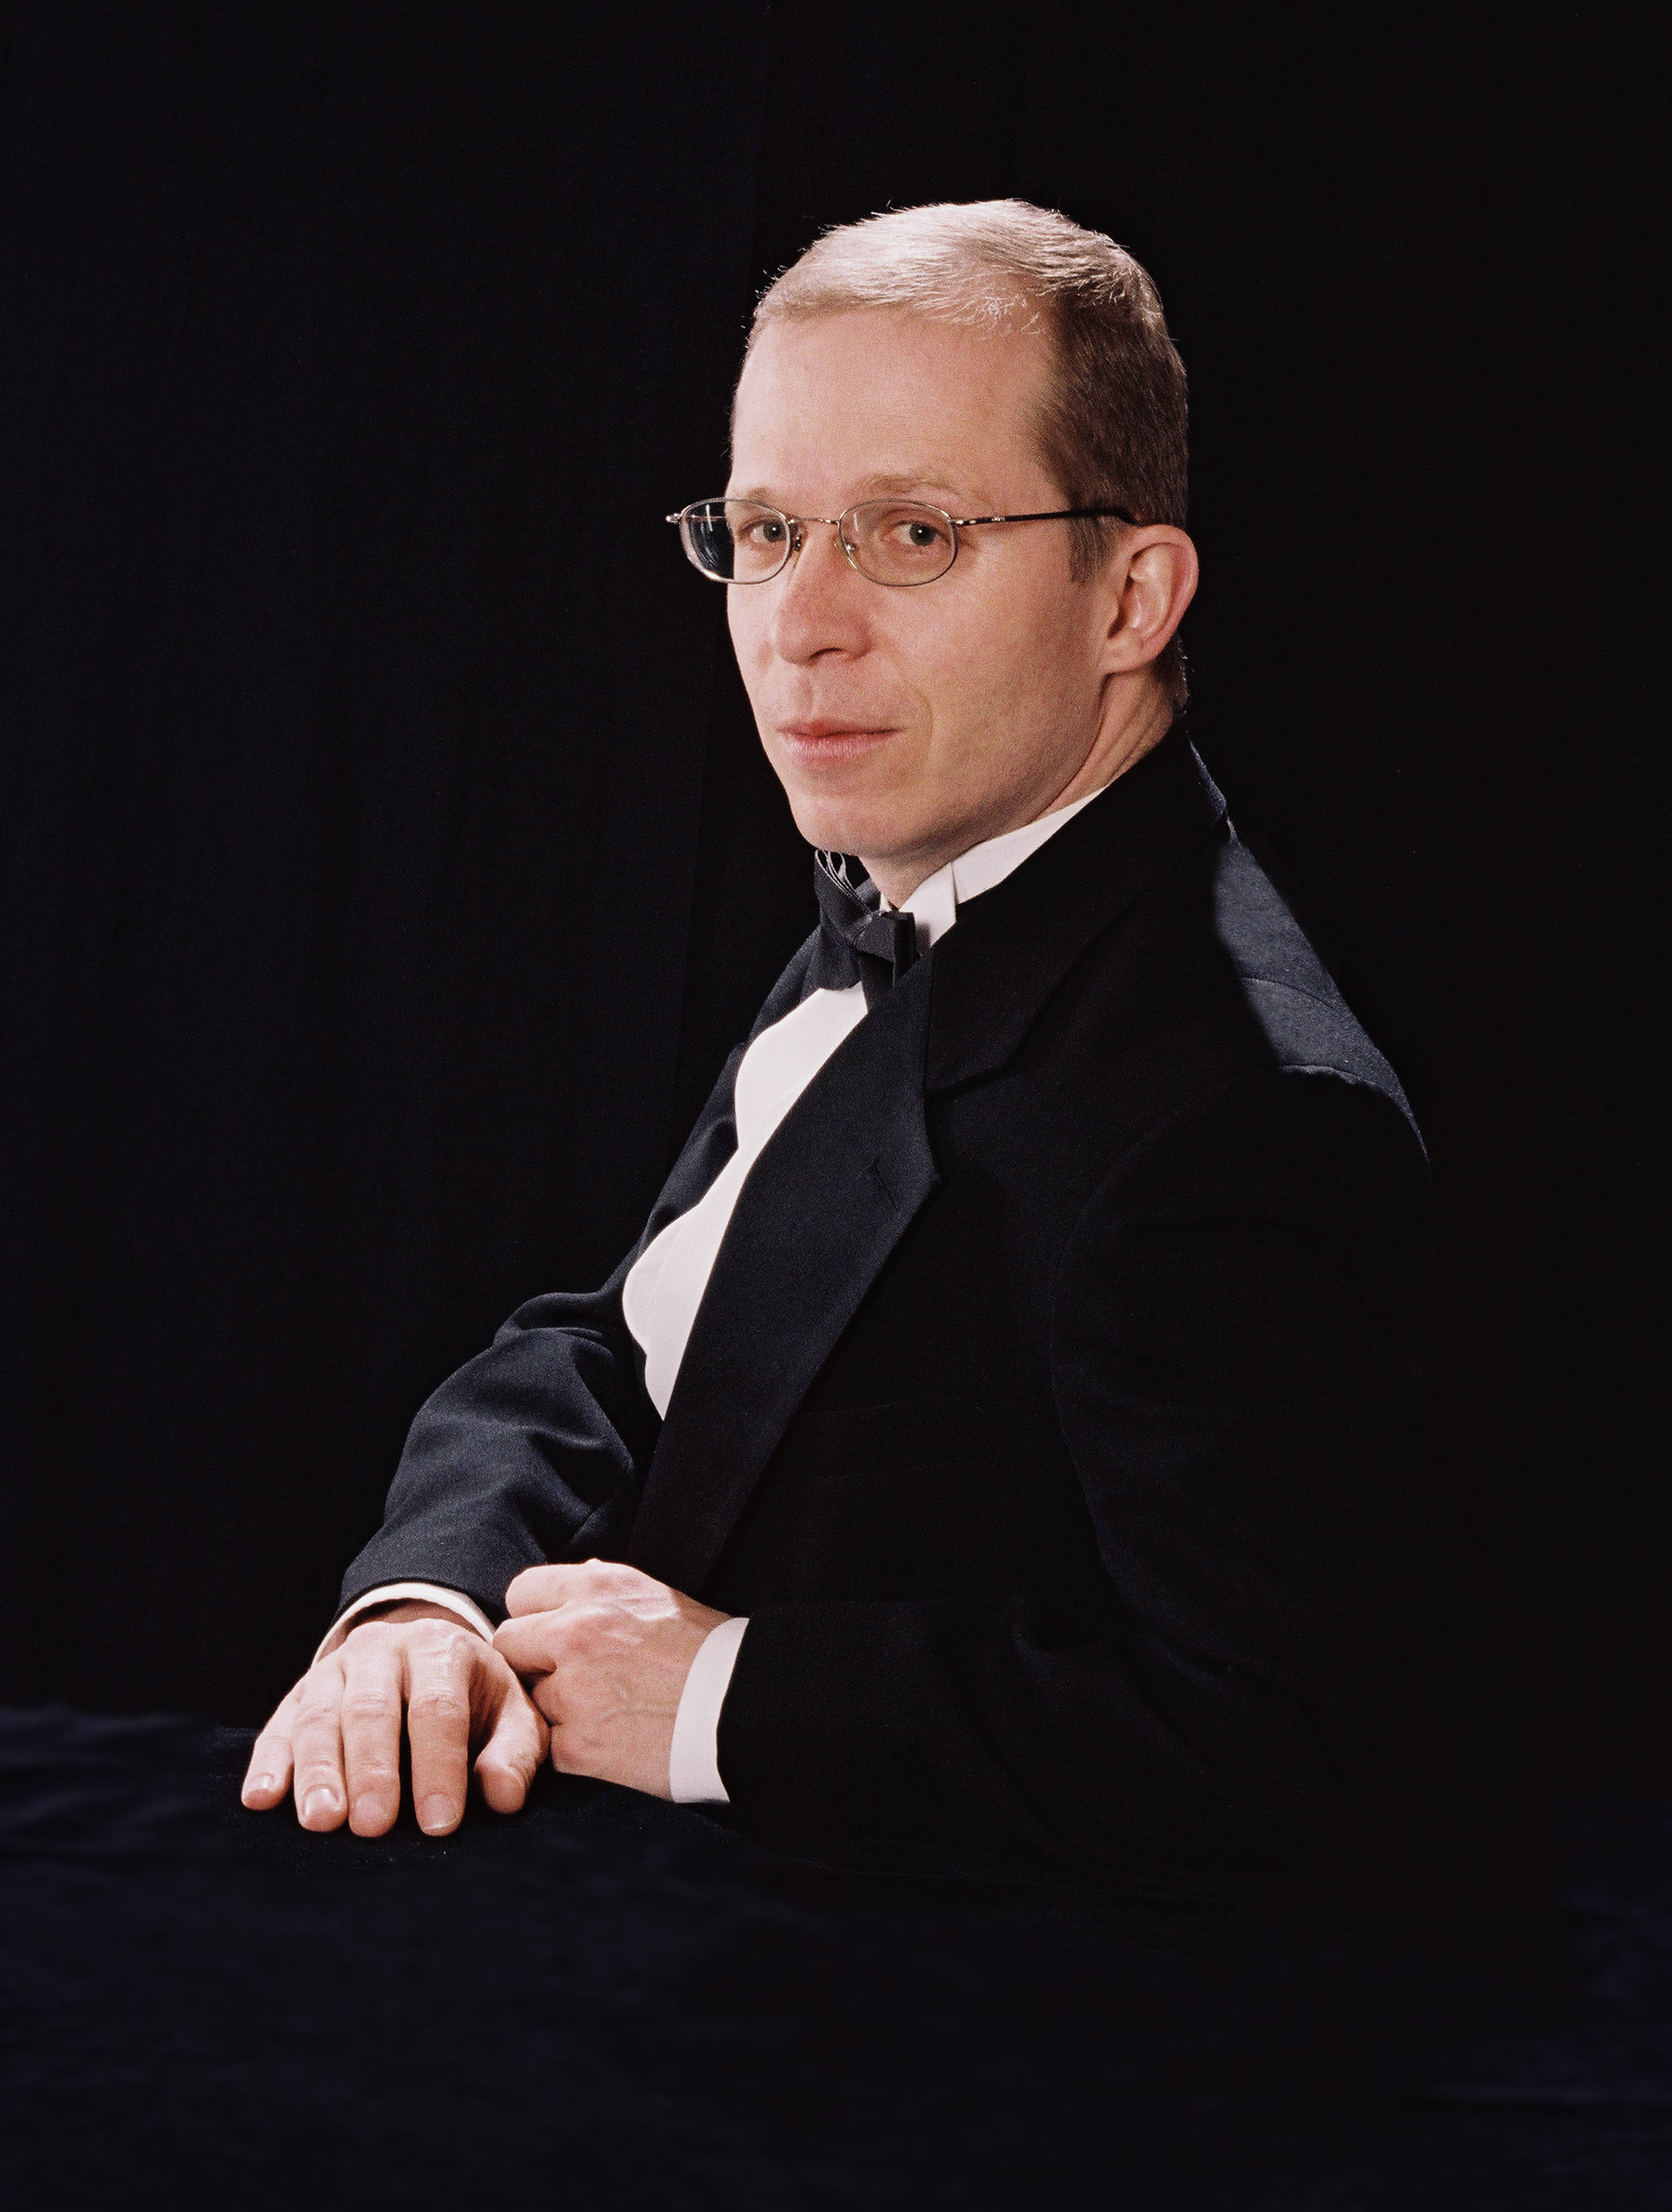 Alexander Tutunov will play compositions by Franz Schubert and Franz Liszt at Juneau Arts & Culture Center, Friday, Jan. 18. (Courtesy Photo | For Alexander Tutunov)